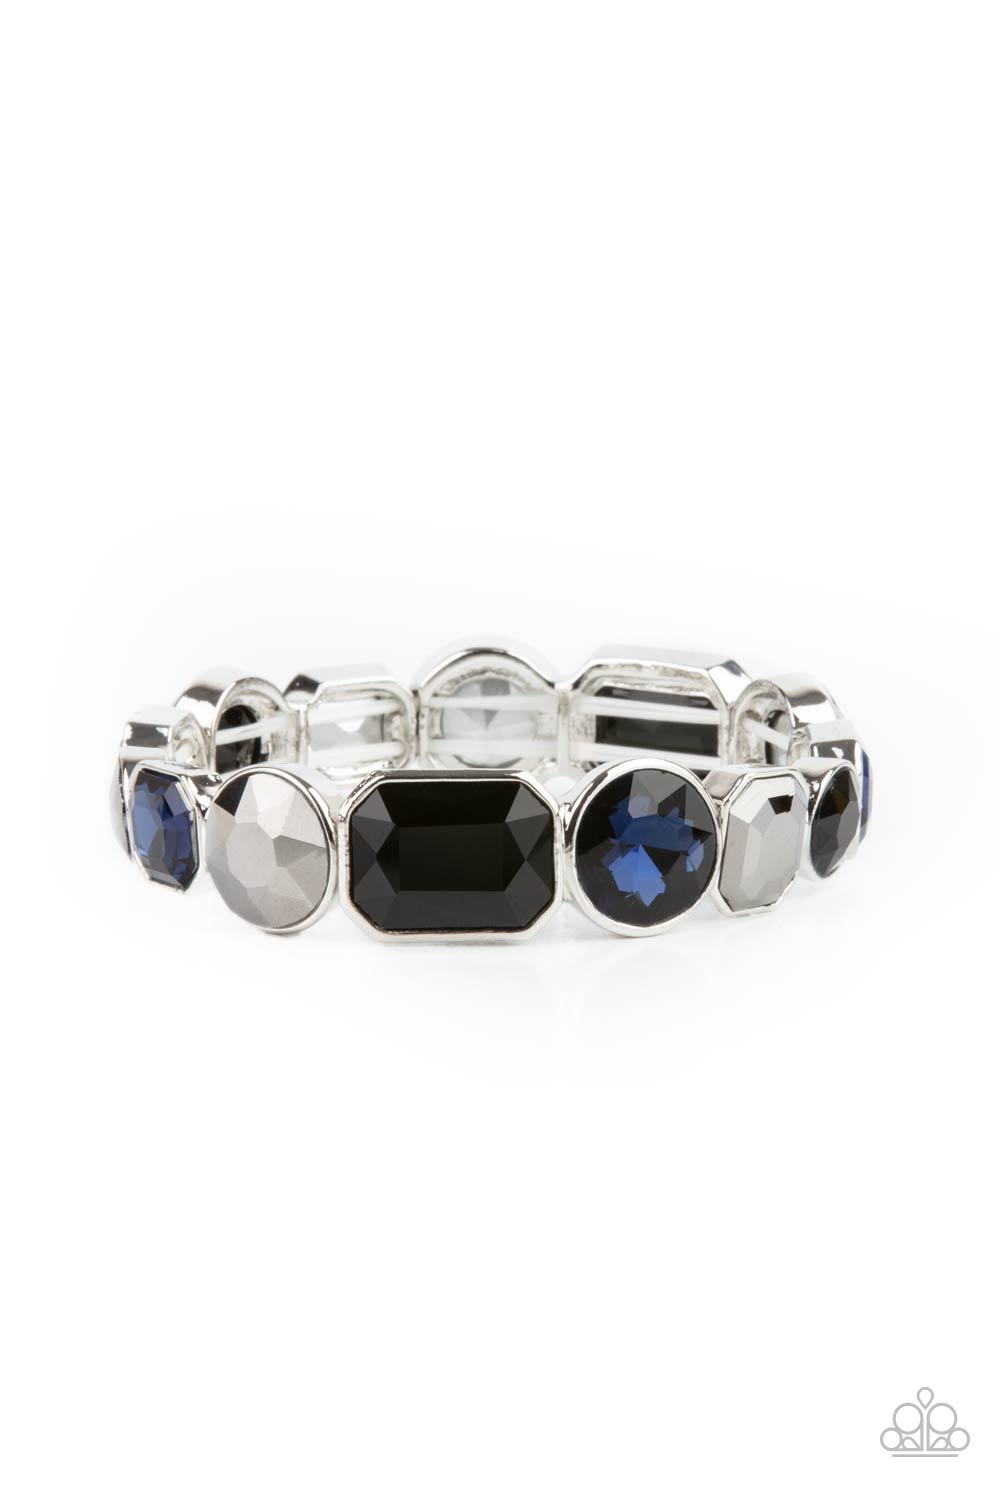 ​Extra Exposure - Black - Blue - Hematite Bracelet - Paparazzi Accessories - 
Encased in sleek silver frames, a smoldering collection of round and emerald cut black, blue, and hematite rhinestones glide along stretchy bands around the wrist, creating a sparkly industrial statement piece. Sold as one individual bracelet.
